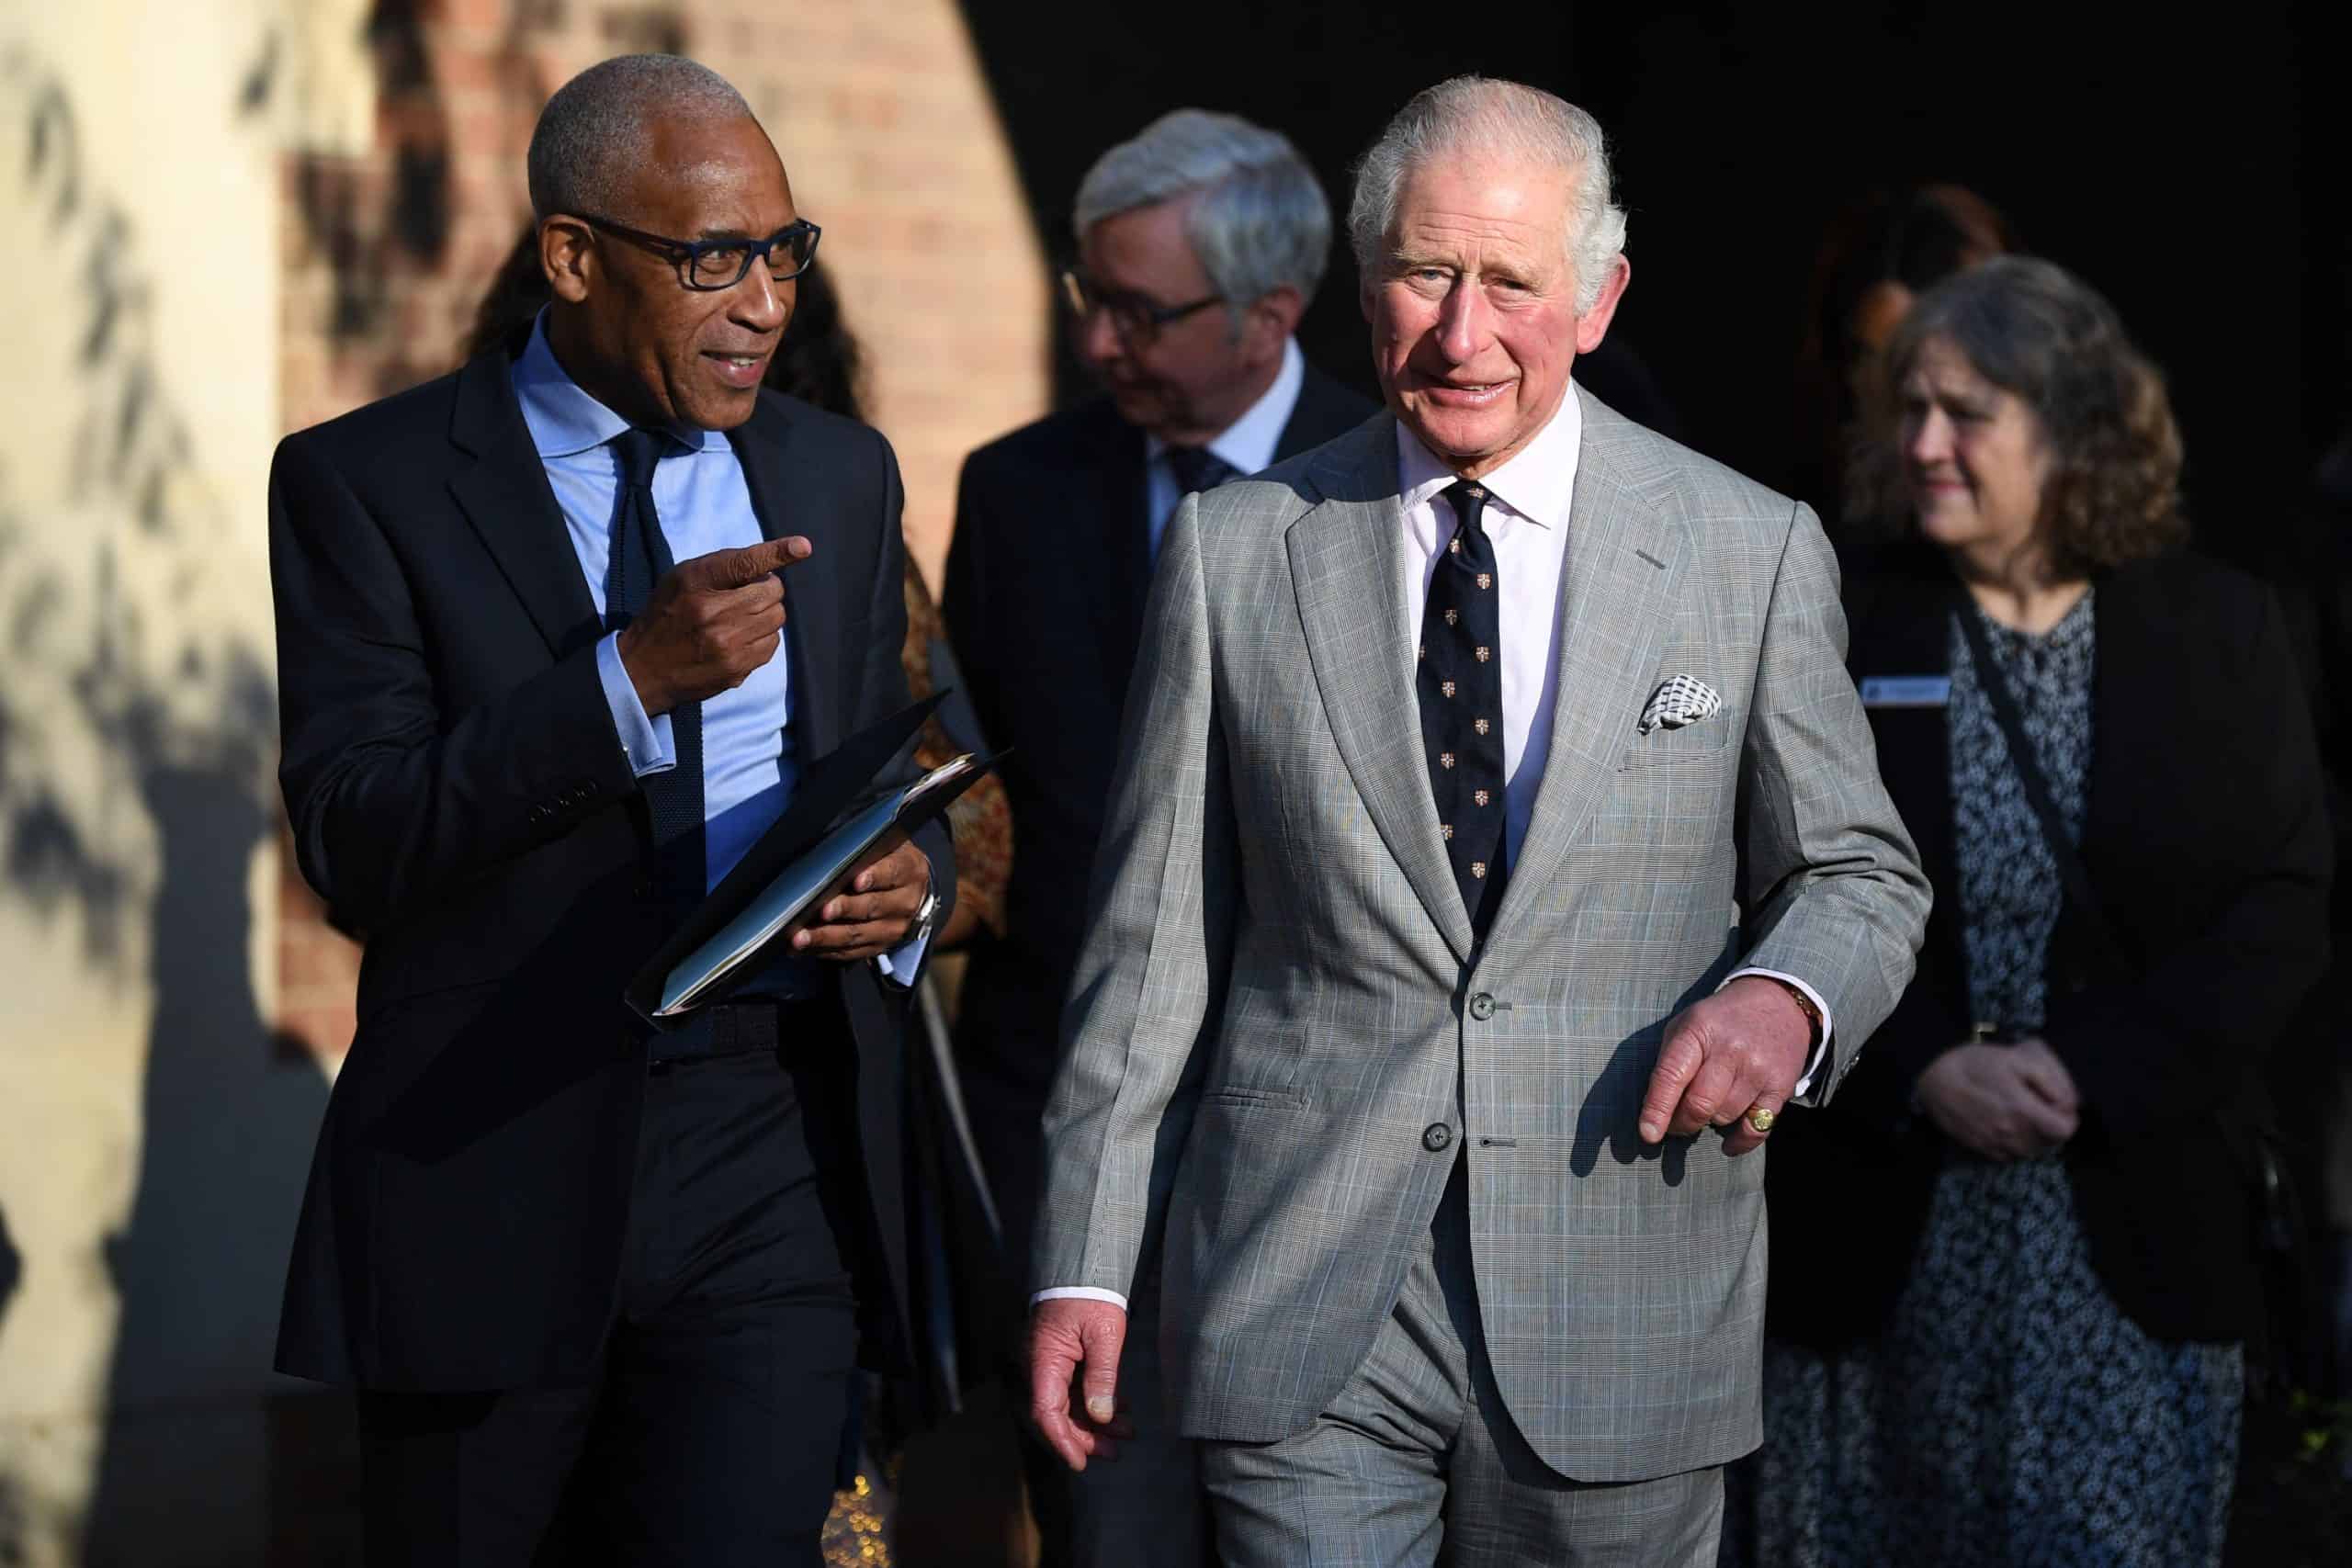 Prince Charles rejects claim he questioned Archie’s skin tone